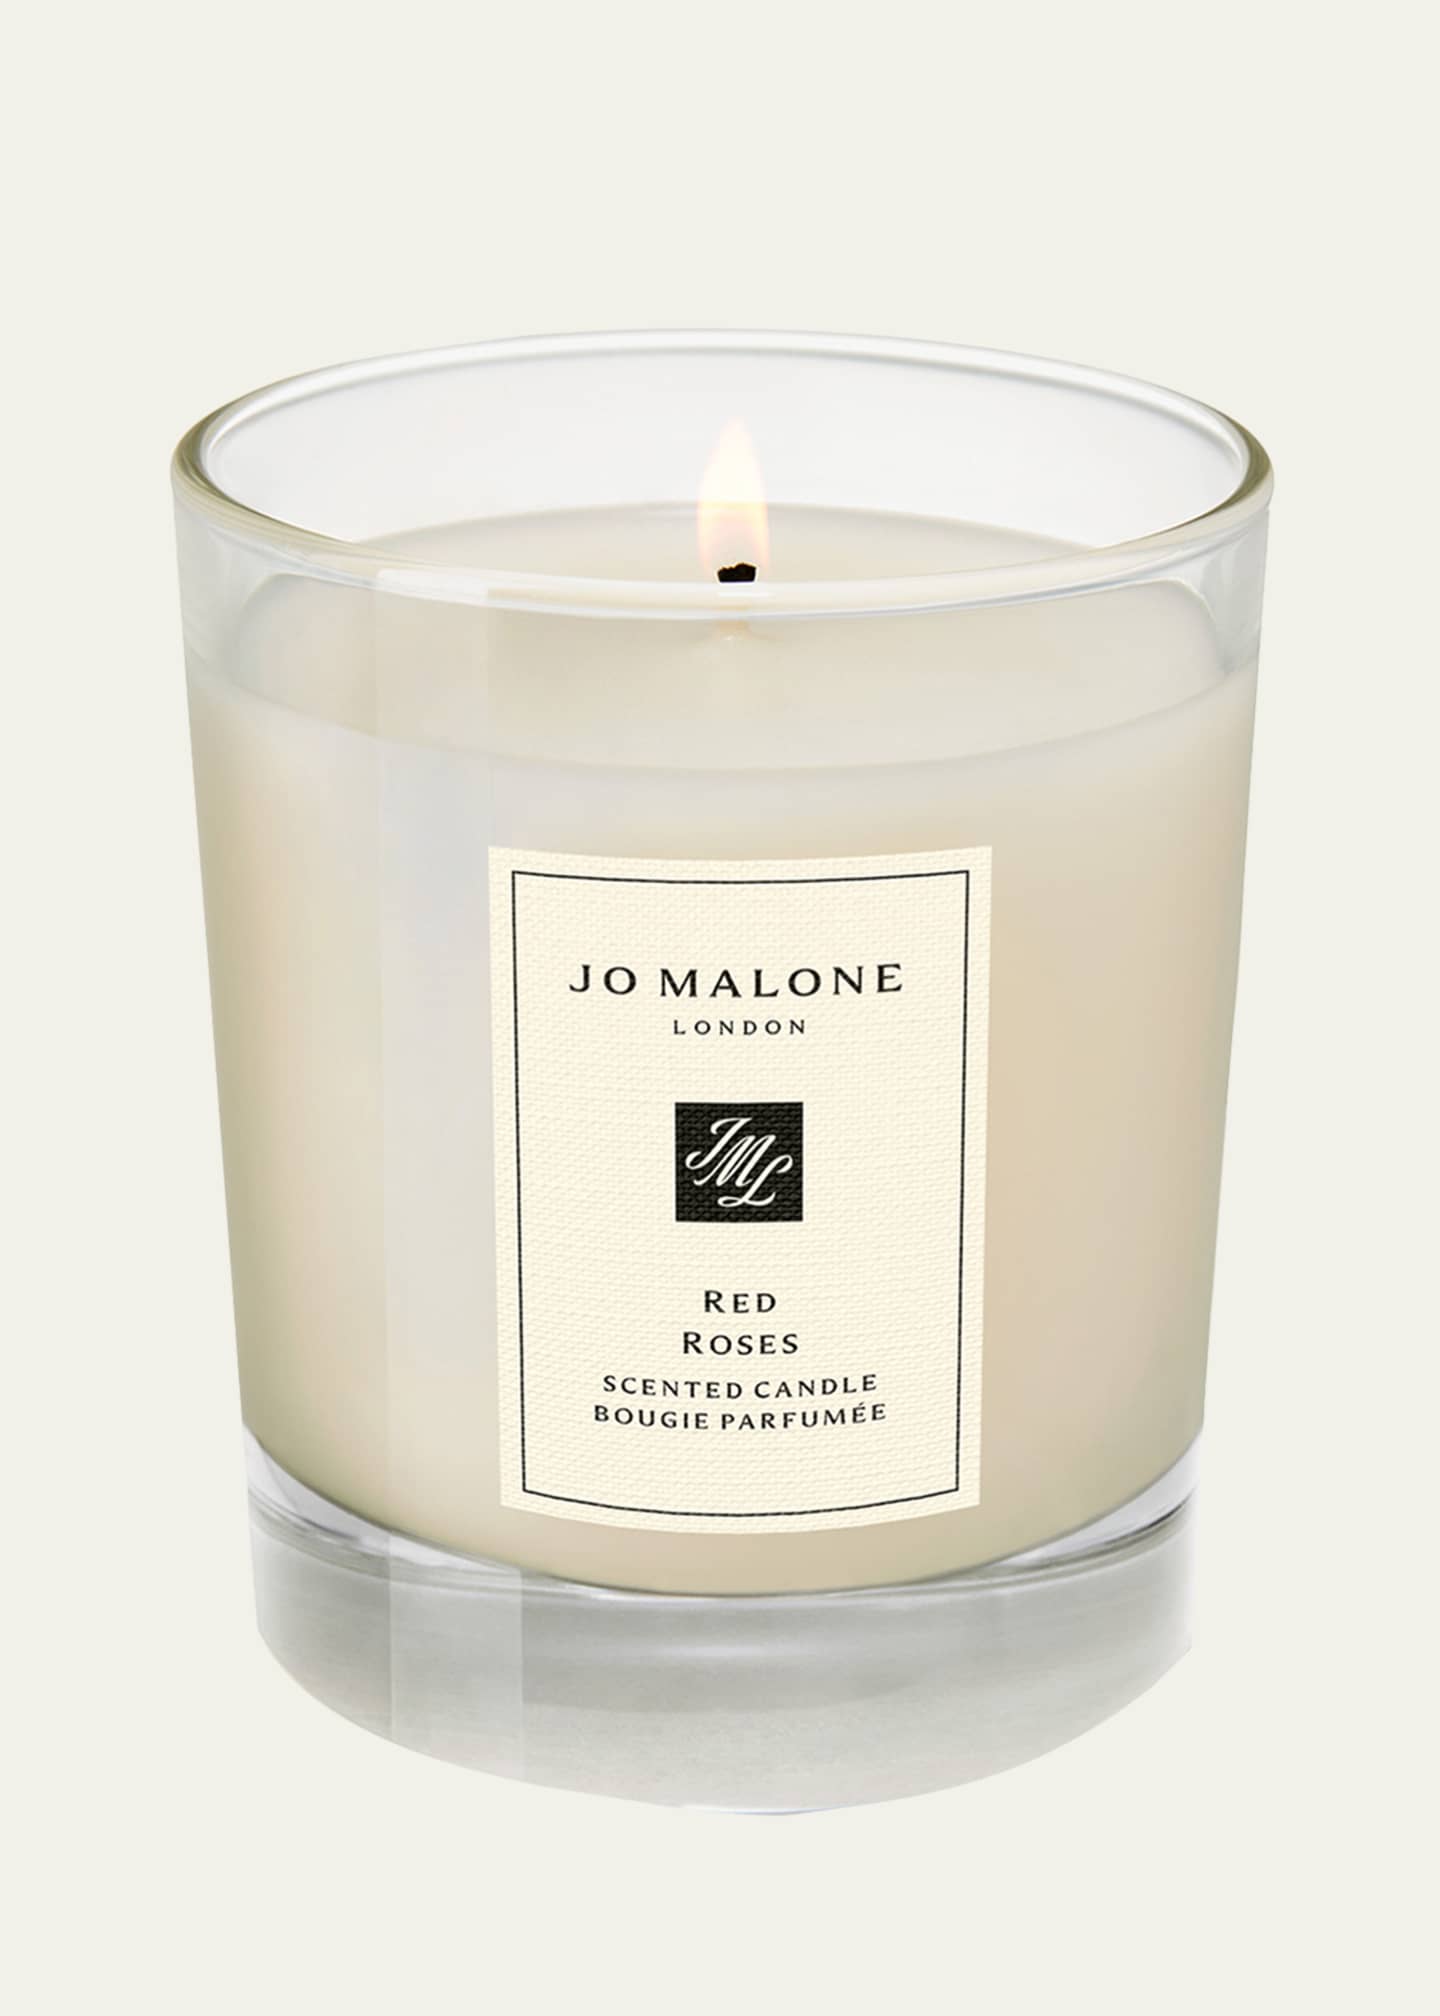 Jo Malone London 7 oz. Red Roses Home Candle Image 3 of 5